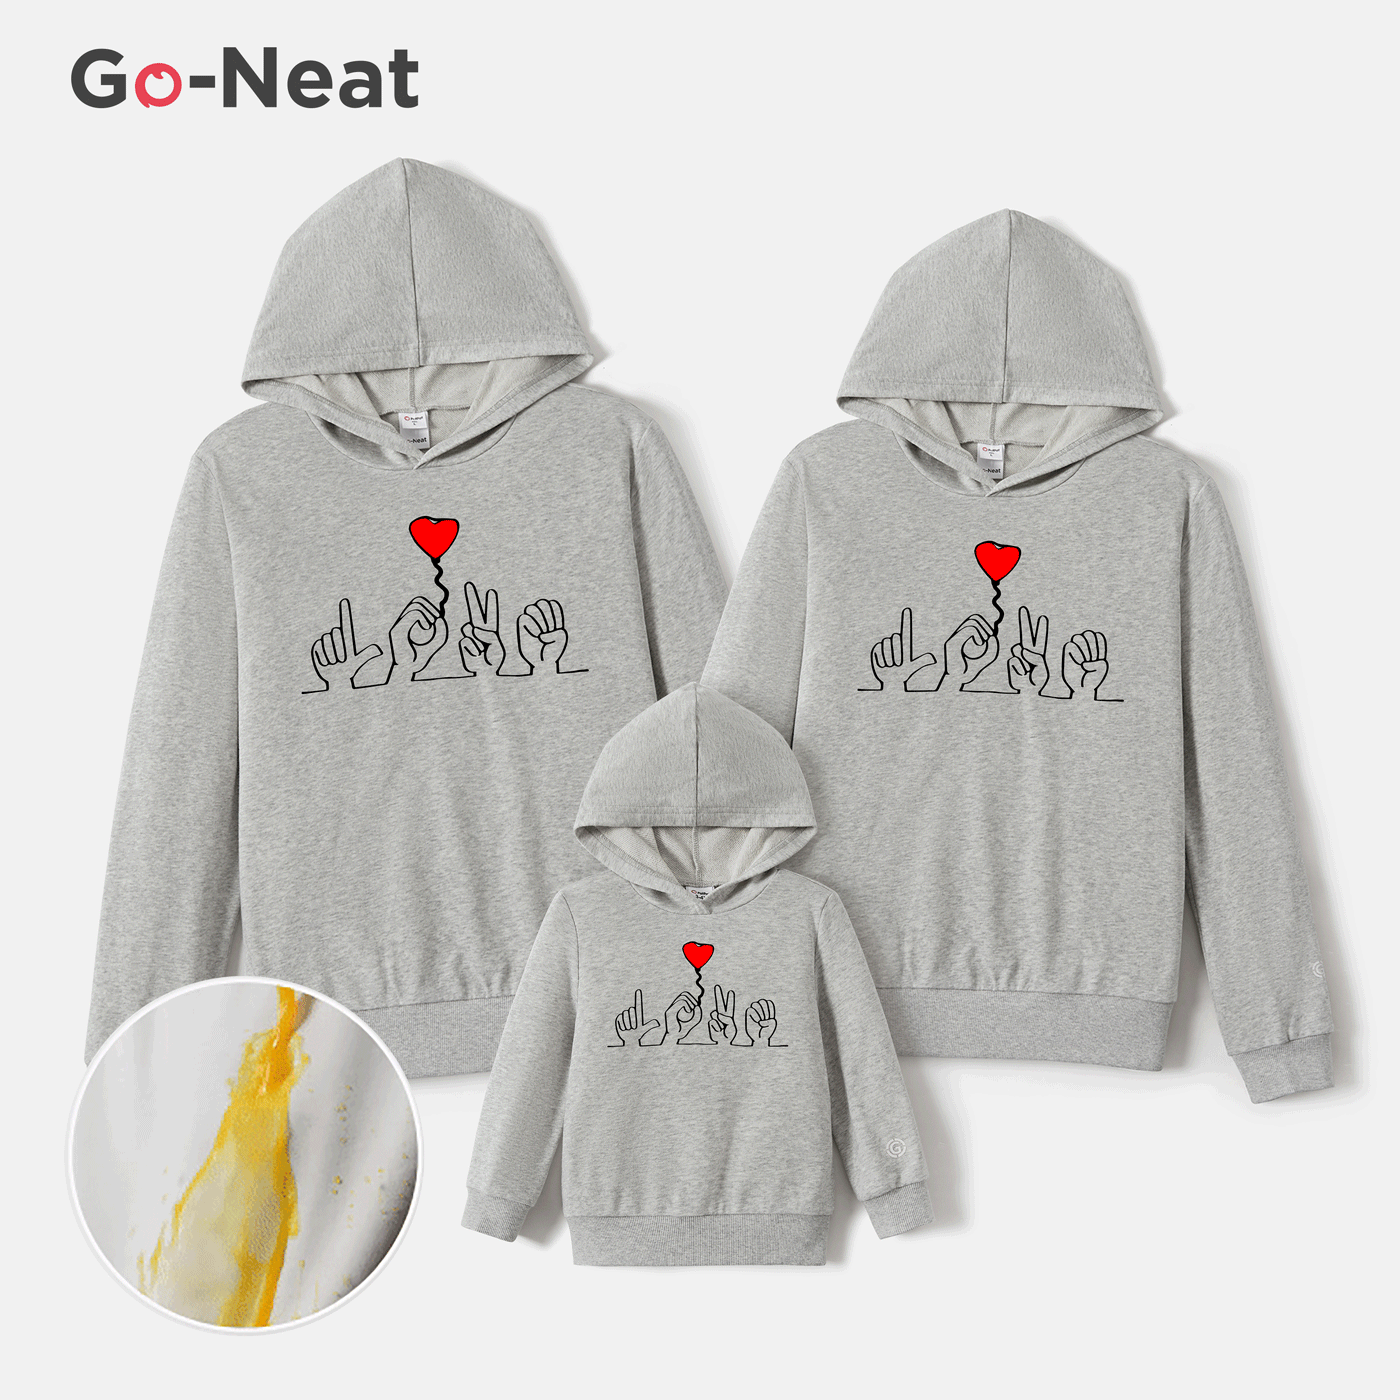 Go-Neat Water Repellent and Stain Family Matching Gesture & Heart Print Grey Long-sleeve Hoodies